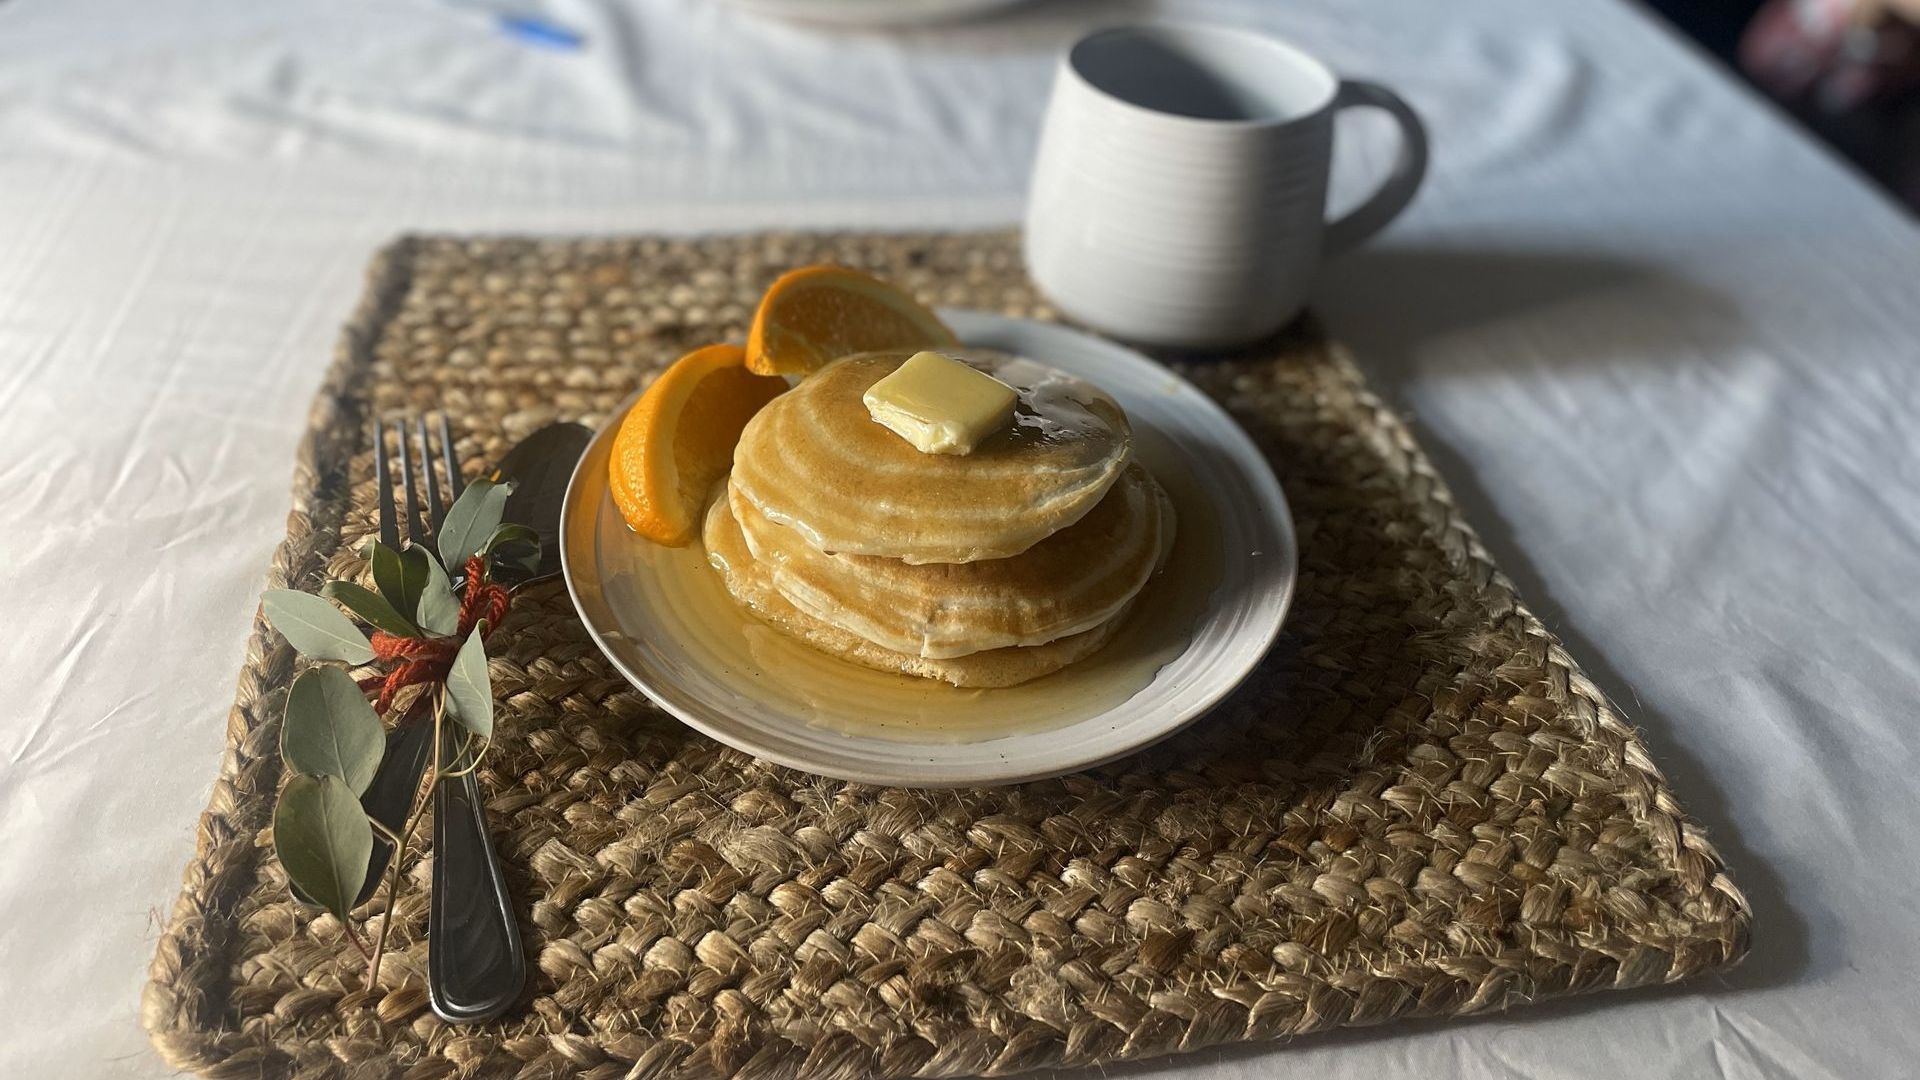 photo of a stack of pancakes and cup of coffee on a placemat